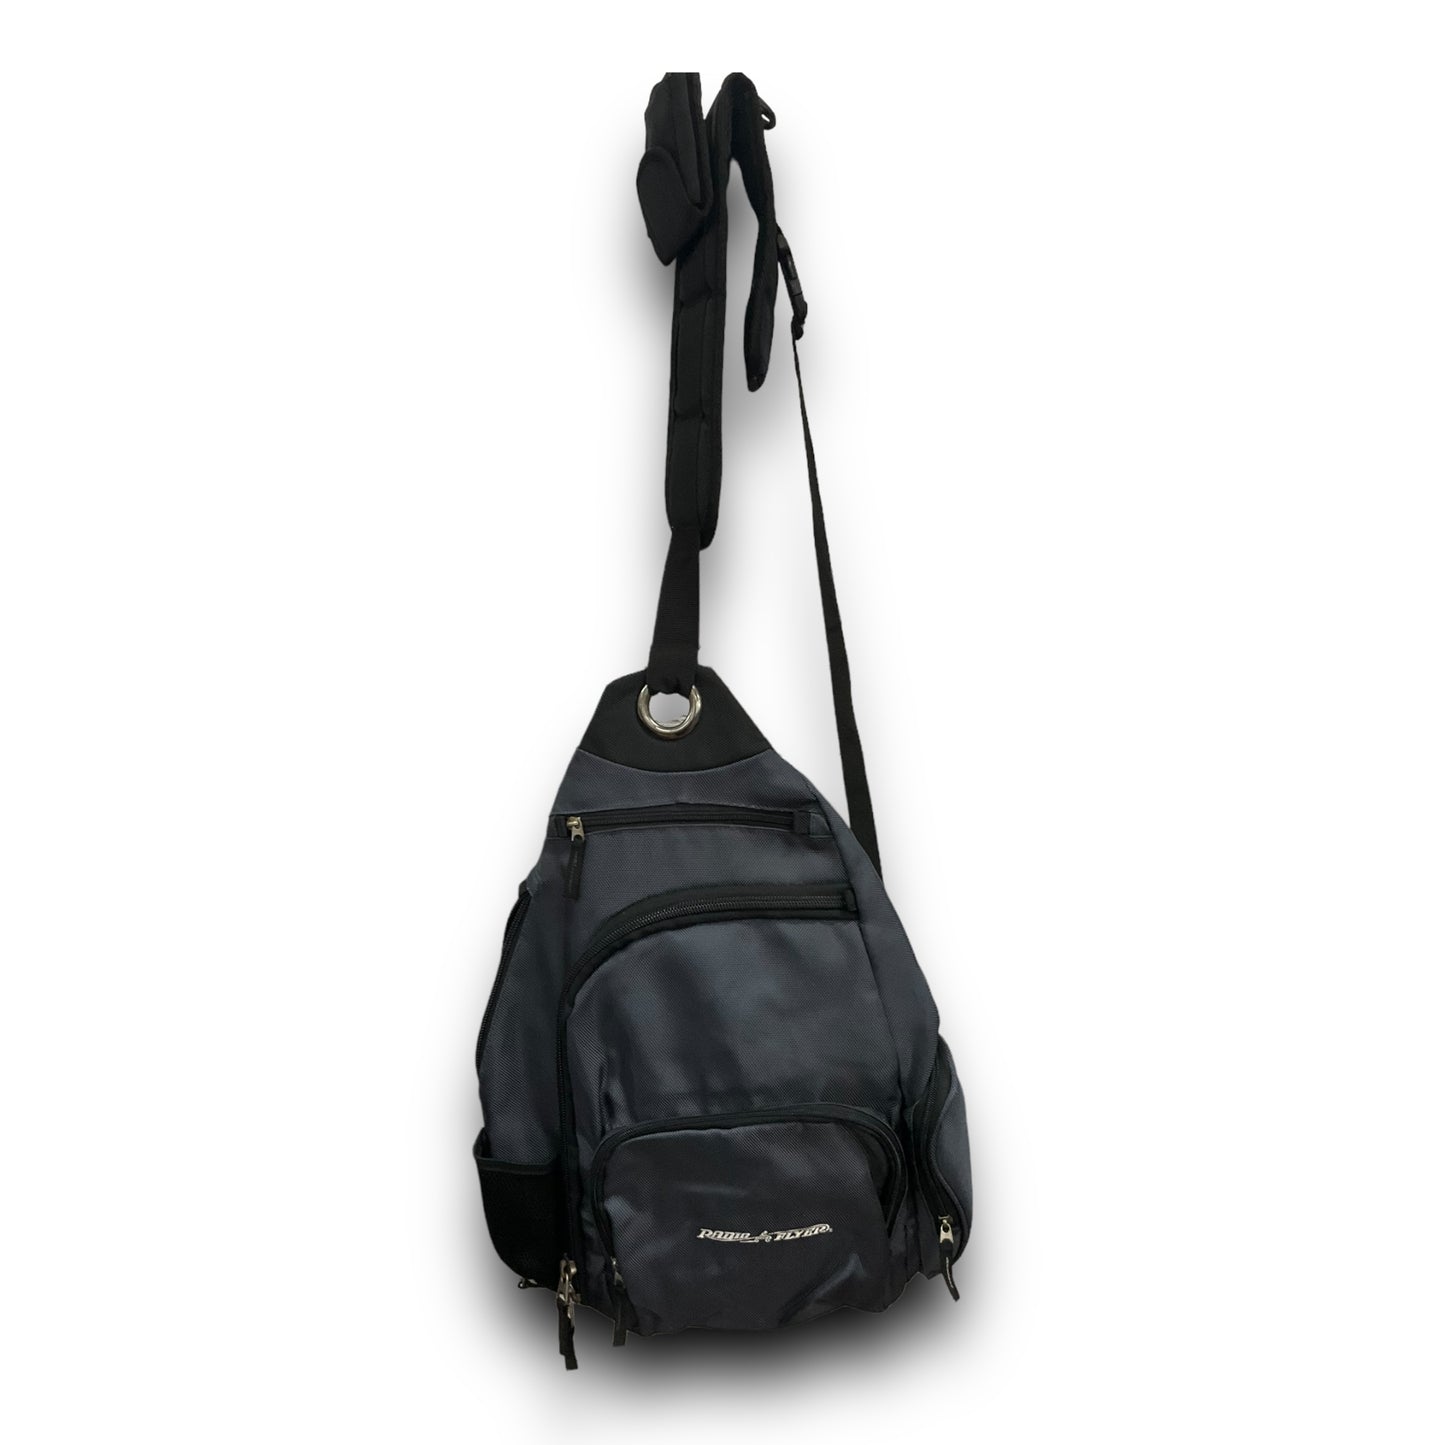 Backpack By Cmc  Size: Large